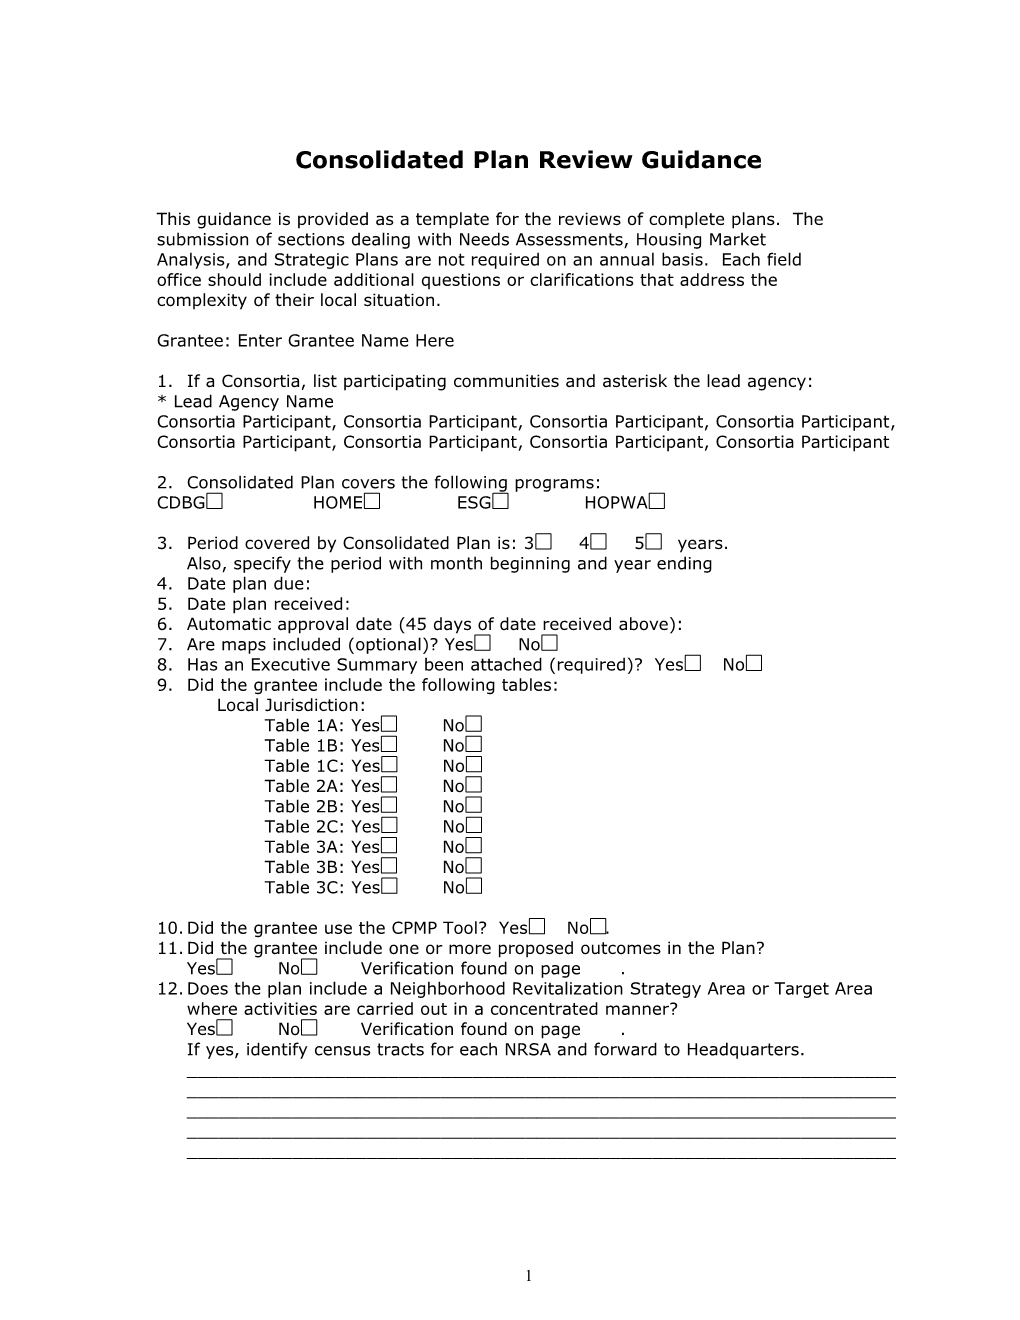 Consolidated Plan Review Guidance